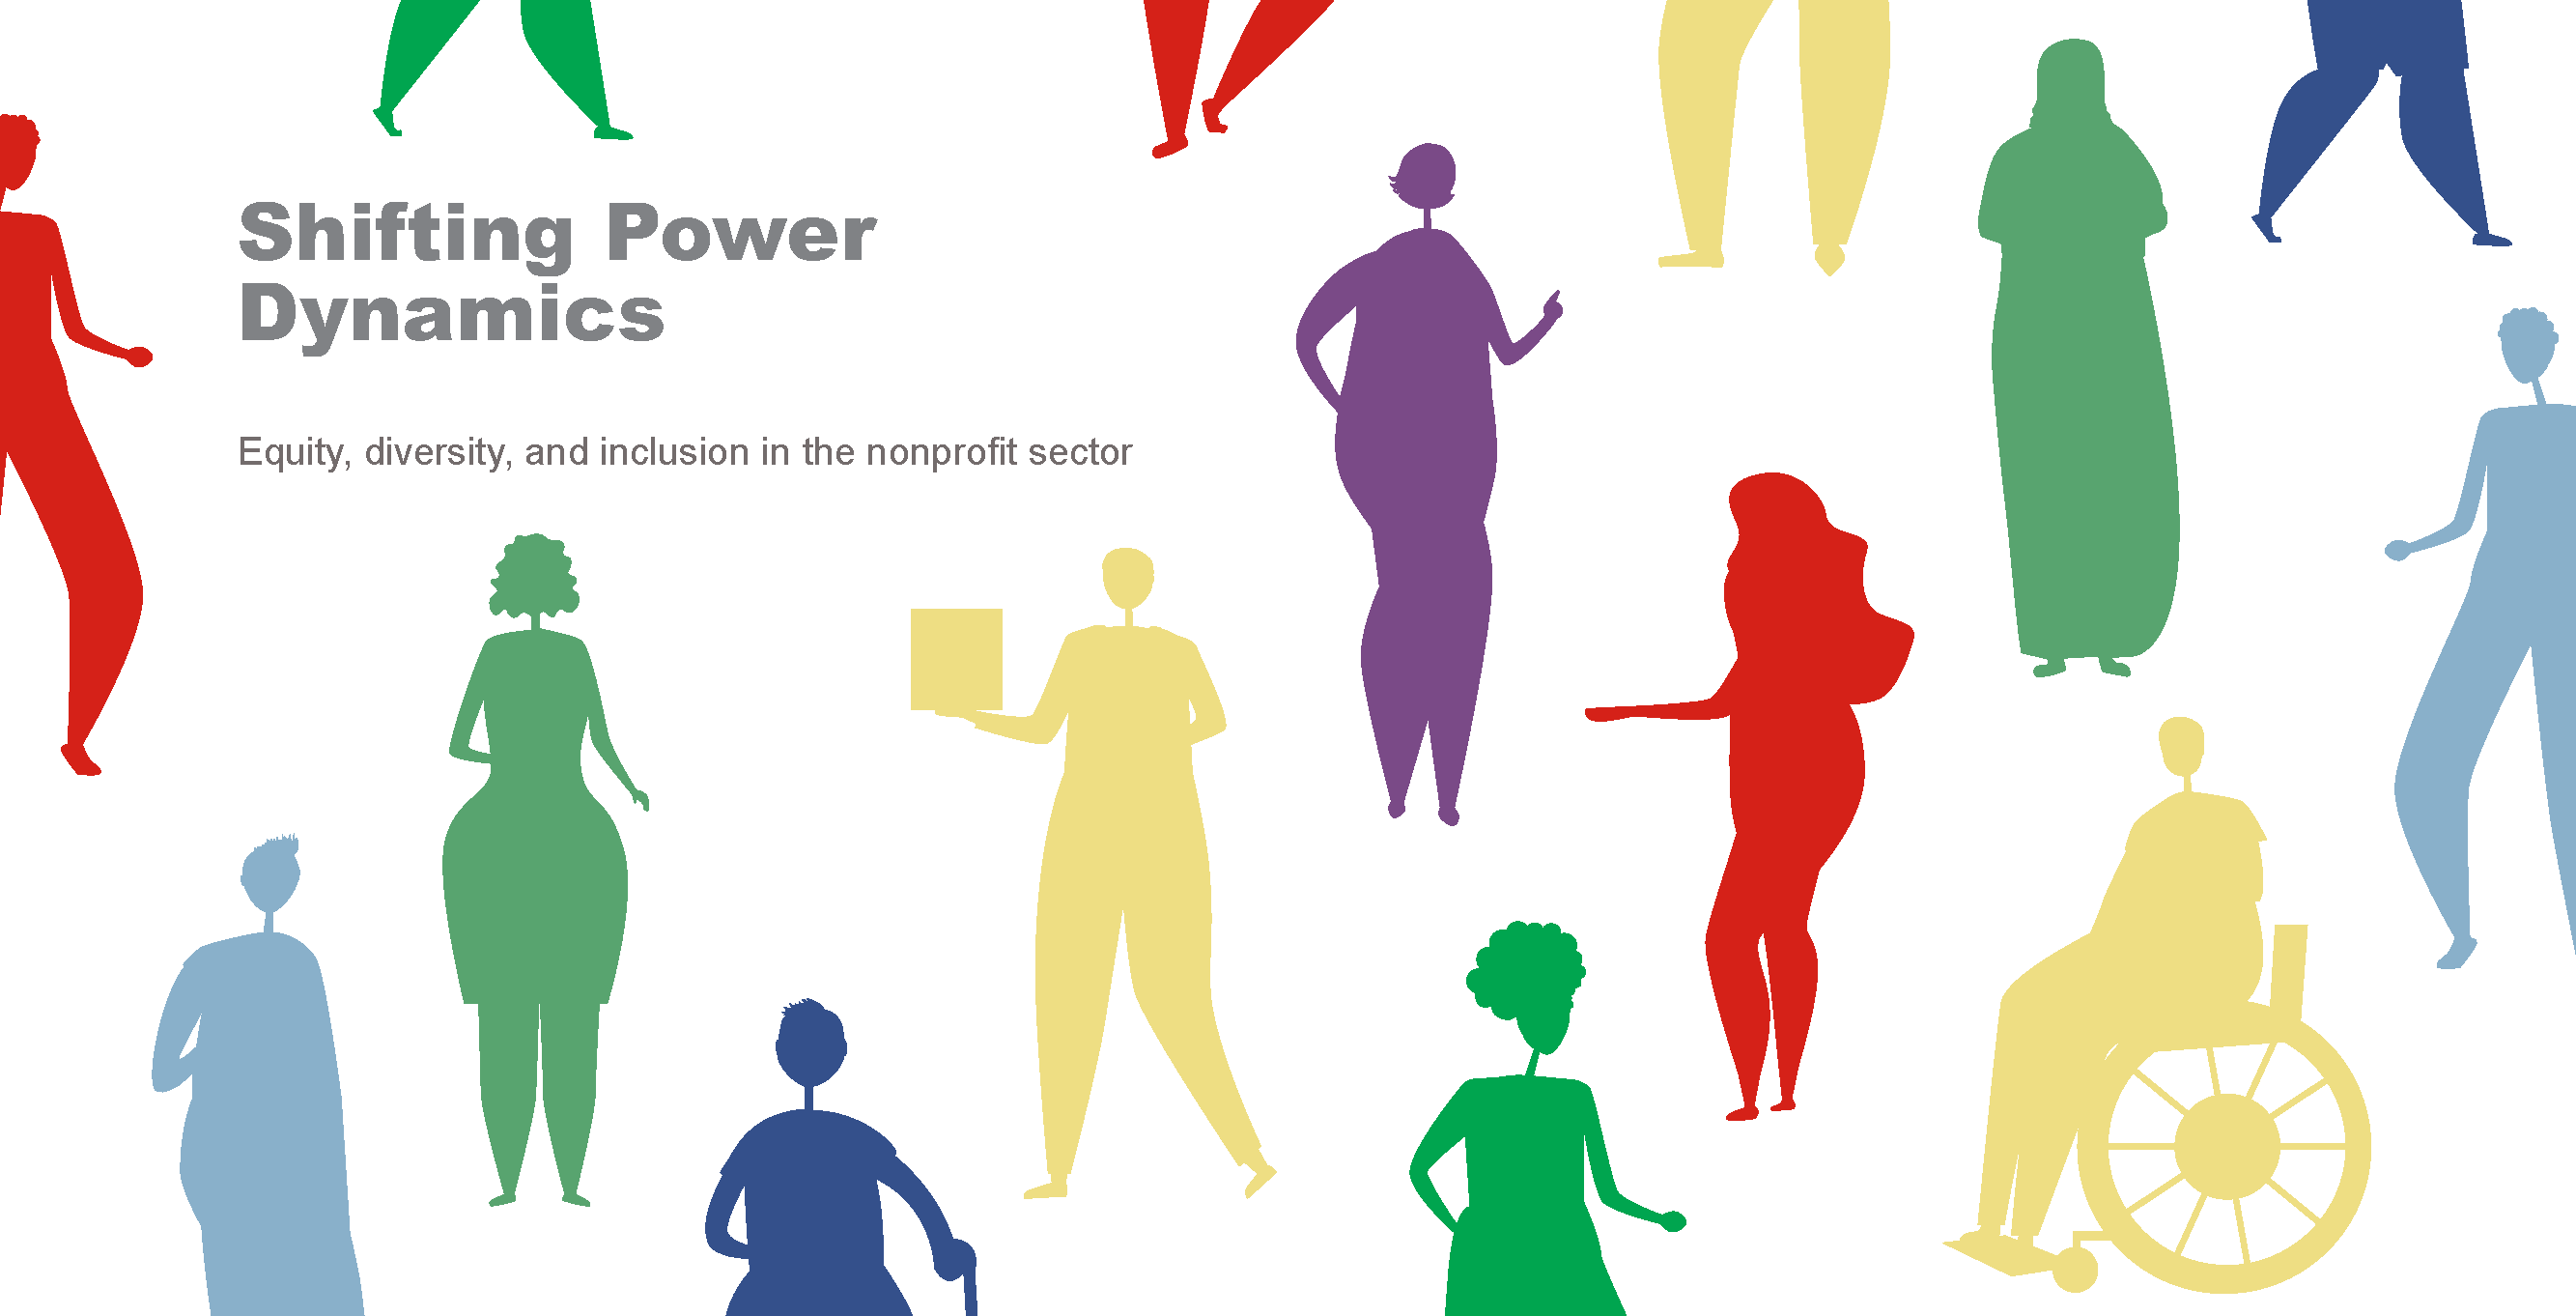 Shifting power dynamics: Equity, diversity and inclusion in the nonprofit sector